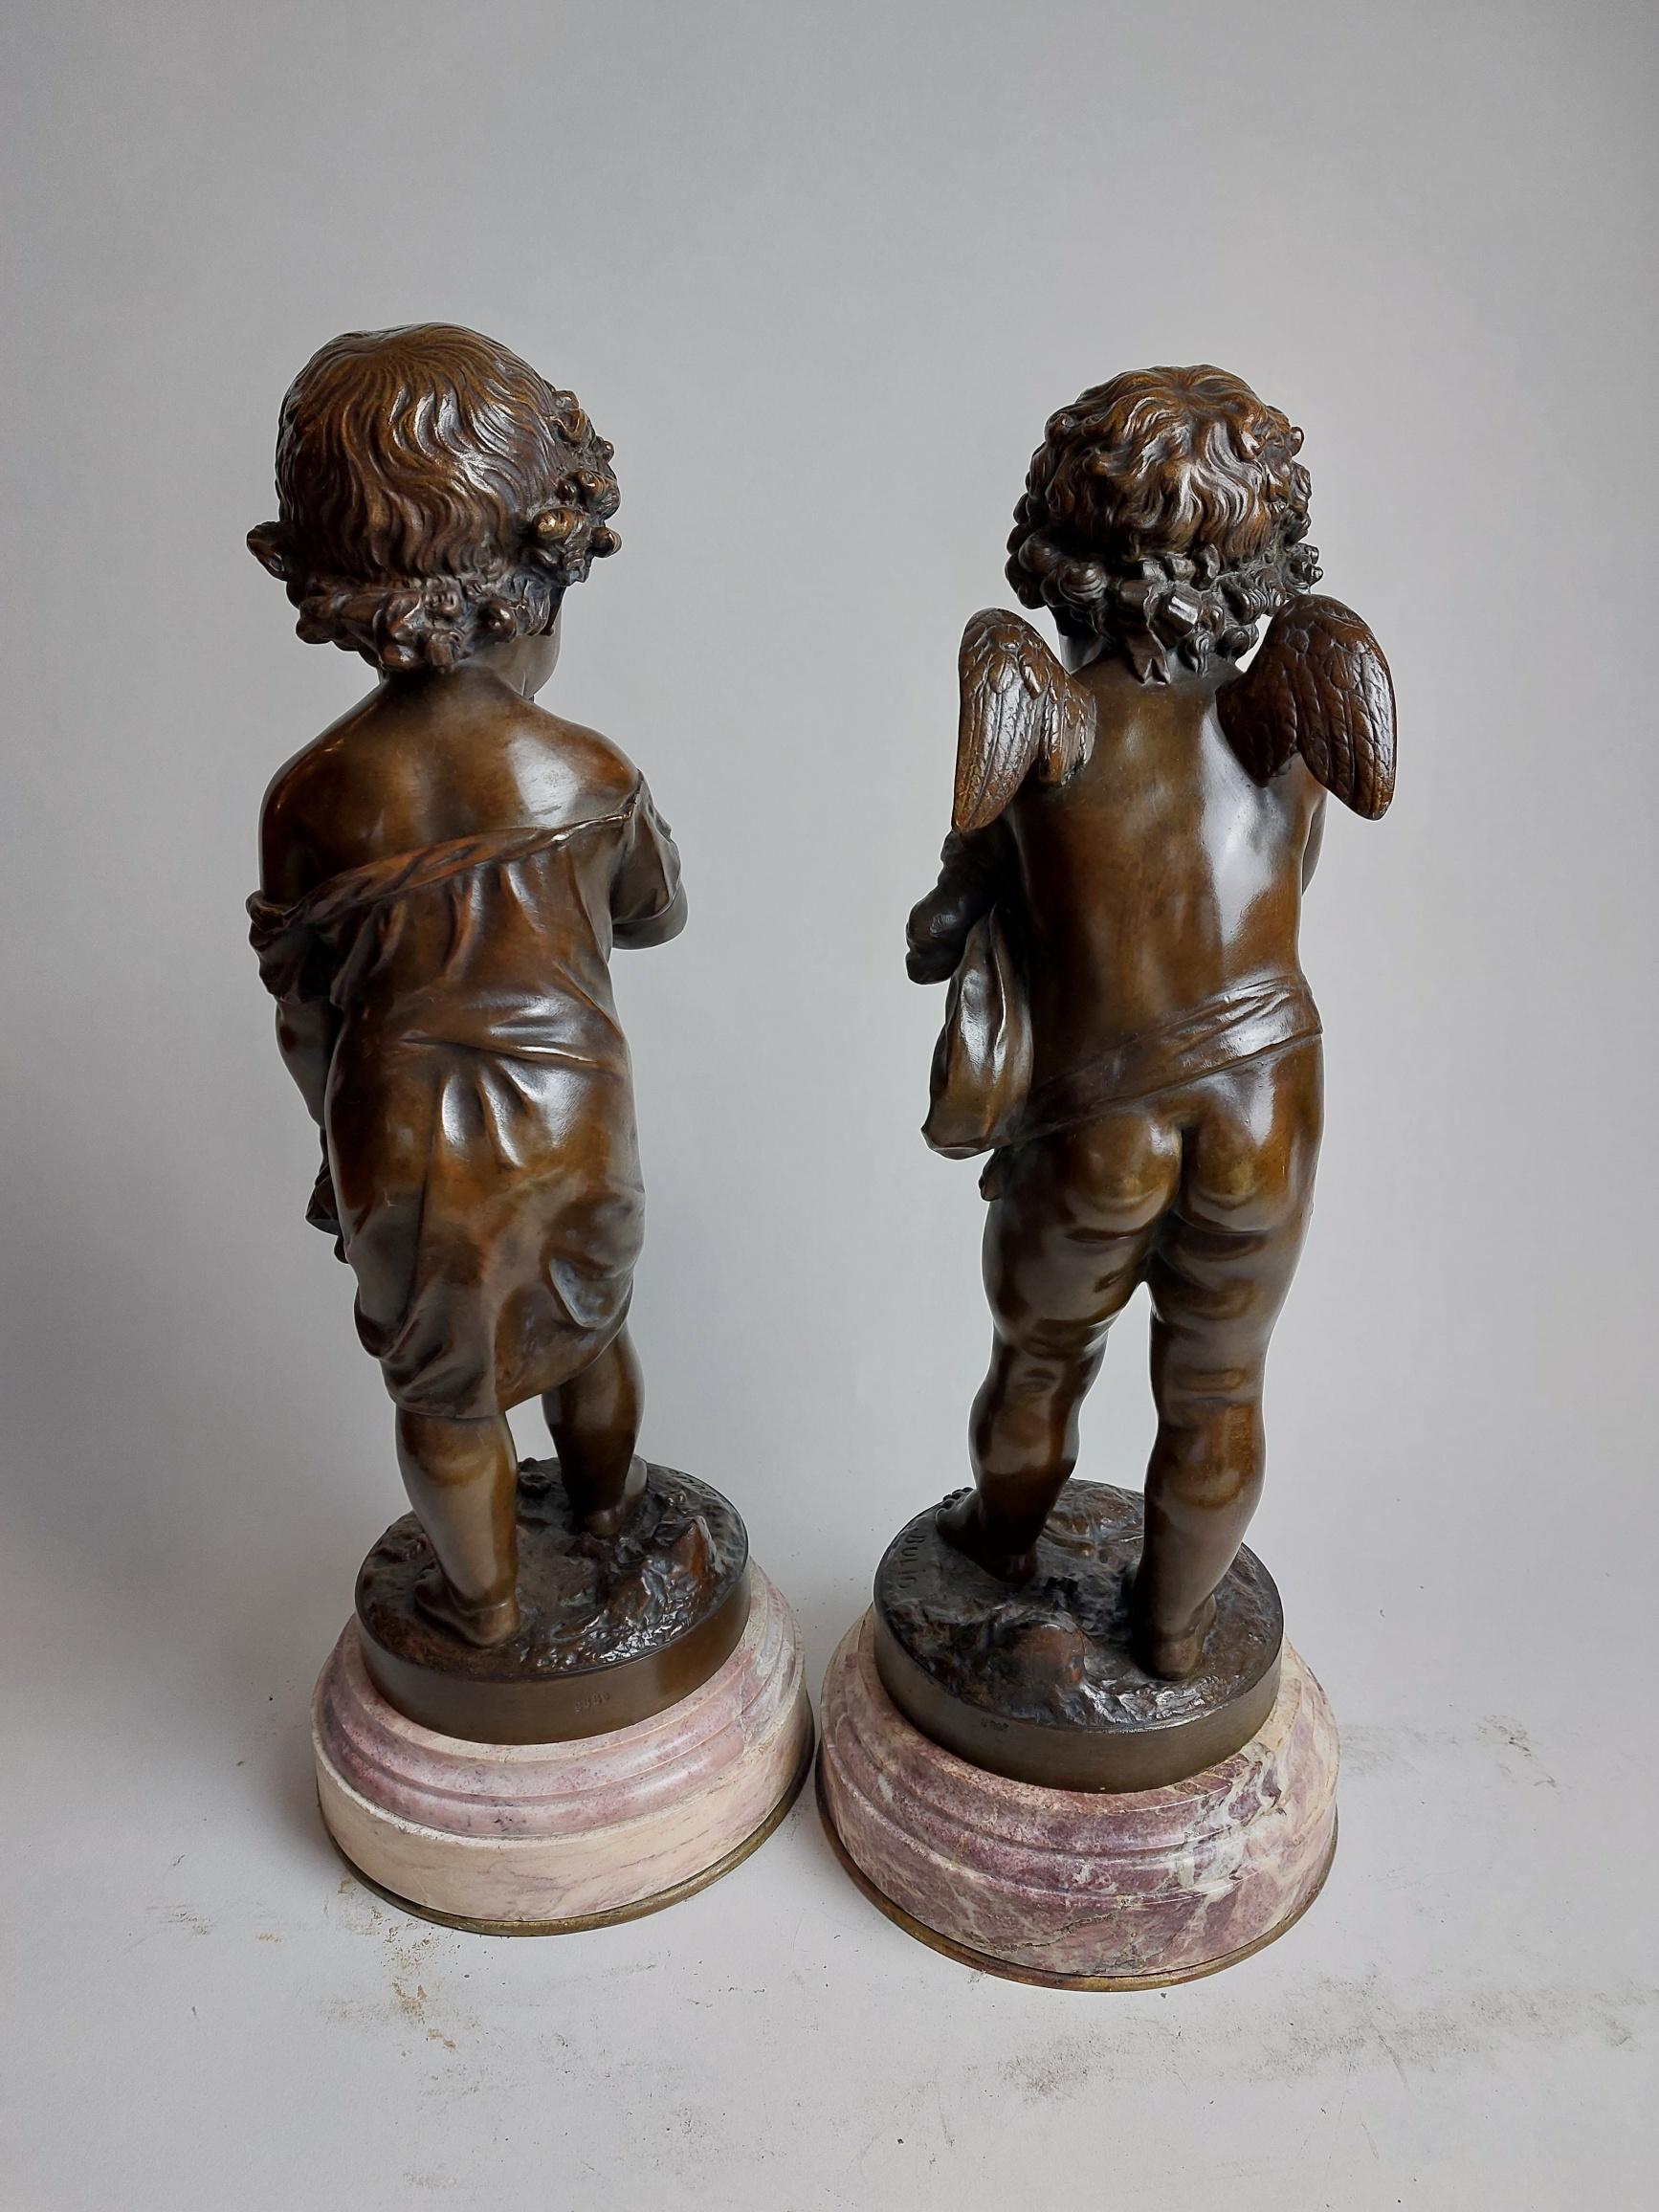 Very Sweet Pair of 19th Century French Bronzes Depicting Cherubs Signed Bulio For Sale 1